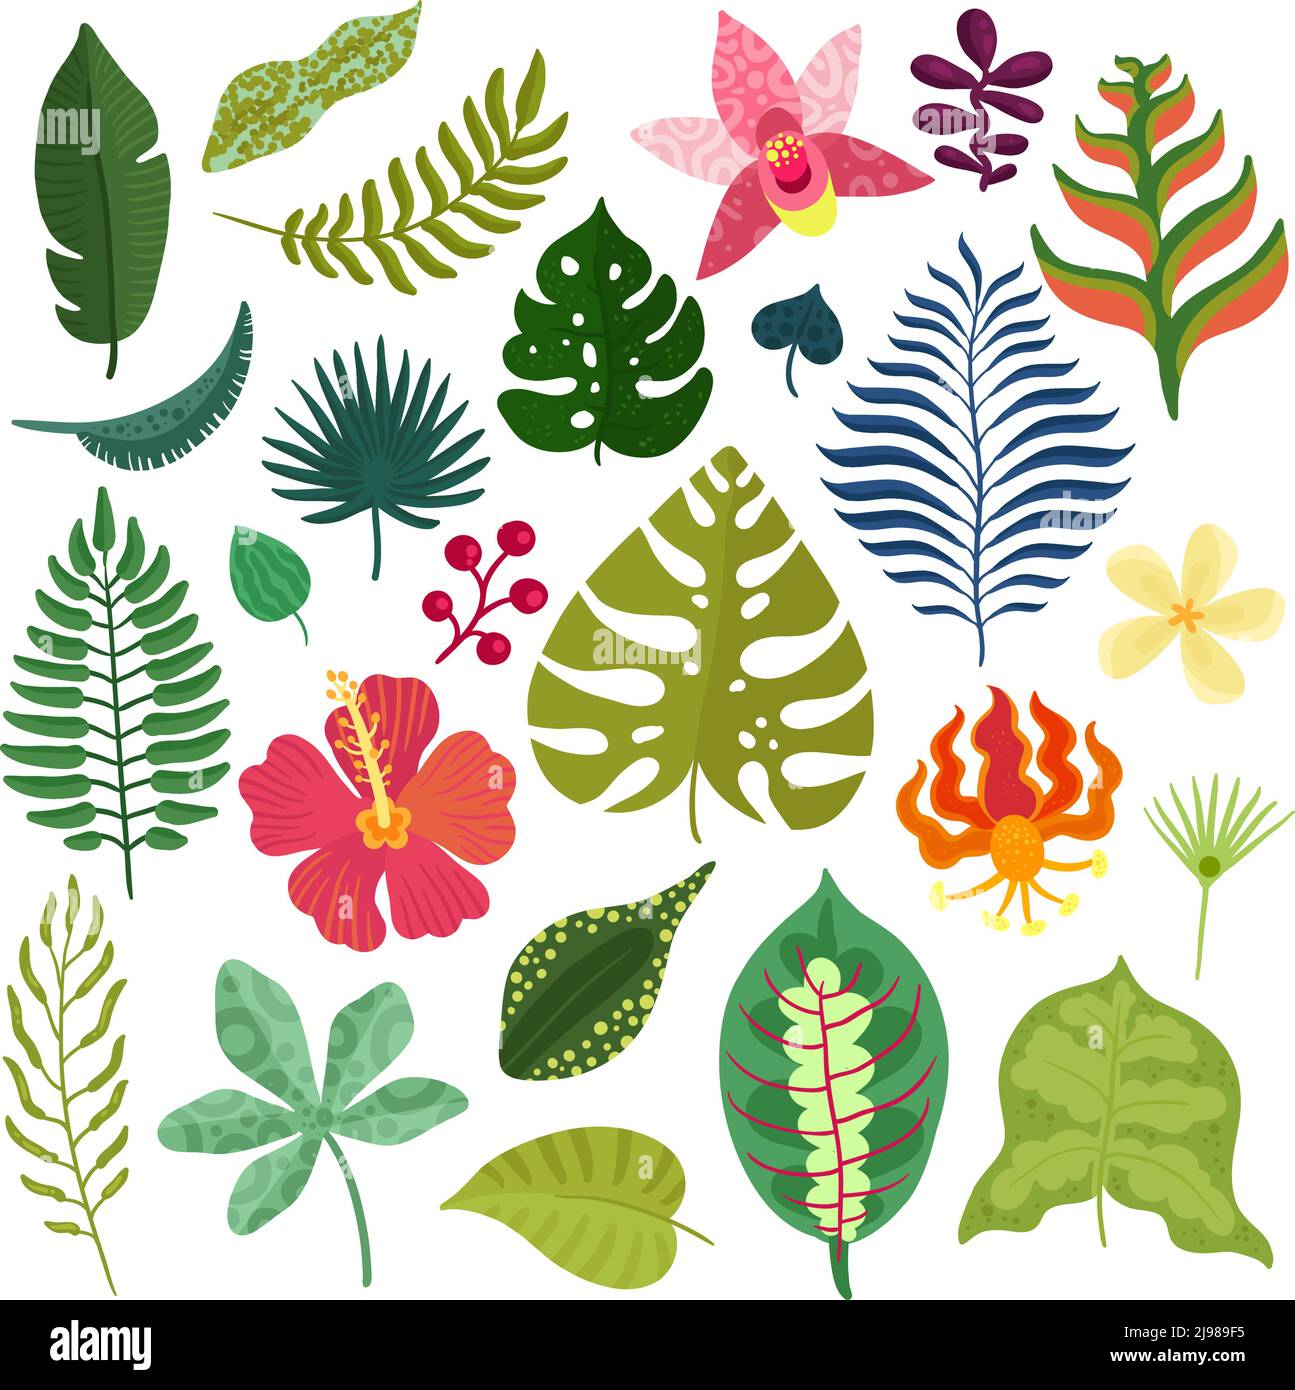 Tropical plants decorative elements collection with monstera leaves hibiscus orchids heliconia flowers fern fronds isolated vector illustration Stock Vector